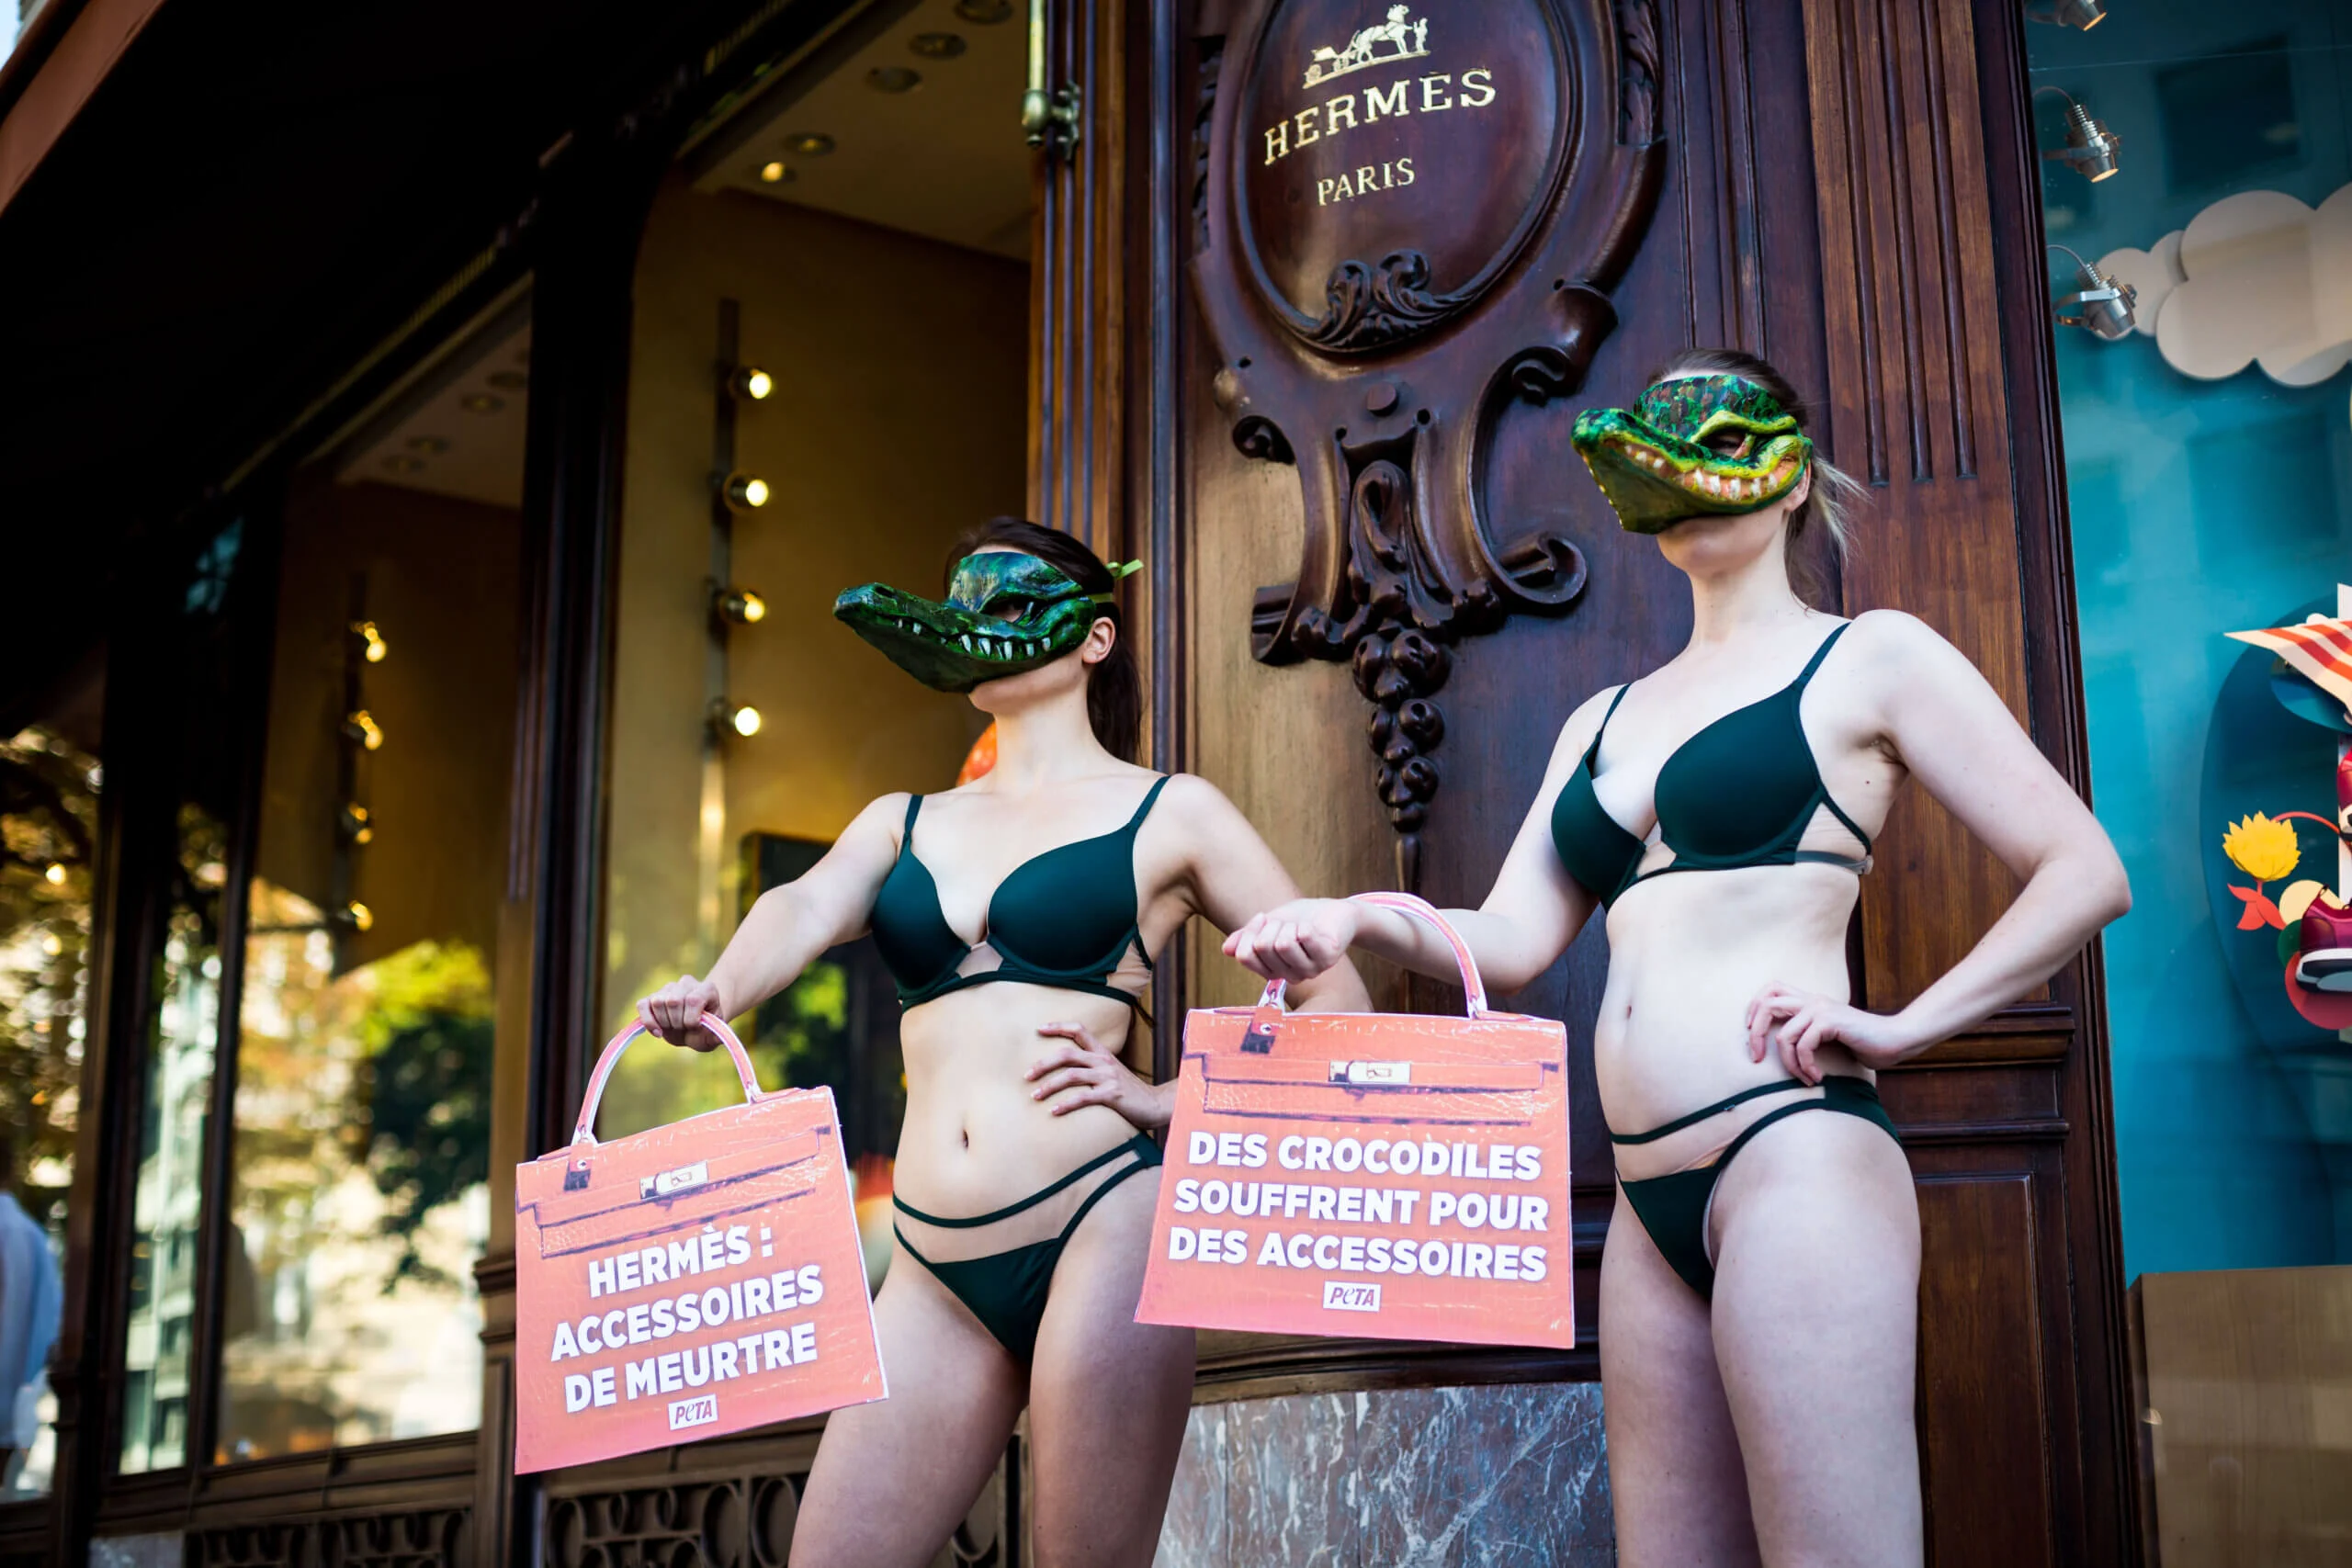 PETA protests outside Hermes store in Gold Coast - ABC7 Chicago